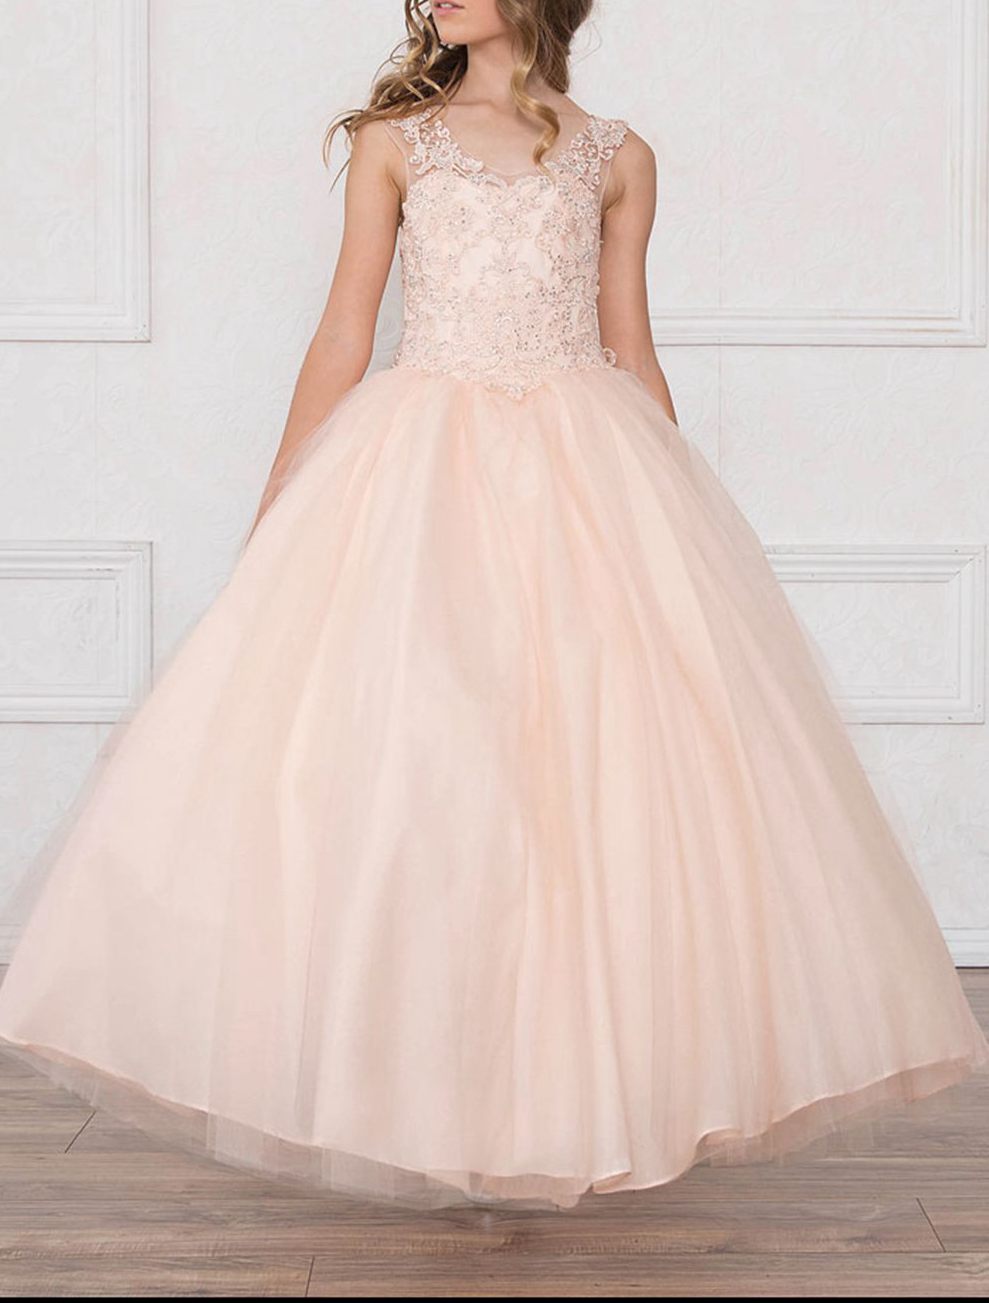 Pearl Pink Tulle Lace Ball Gown Children's Prom Dress (FGD296)